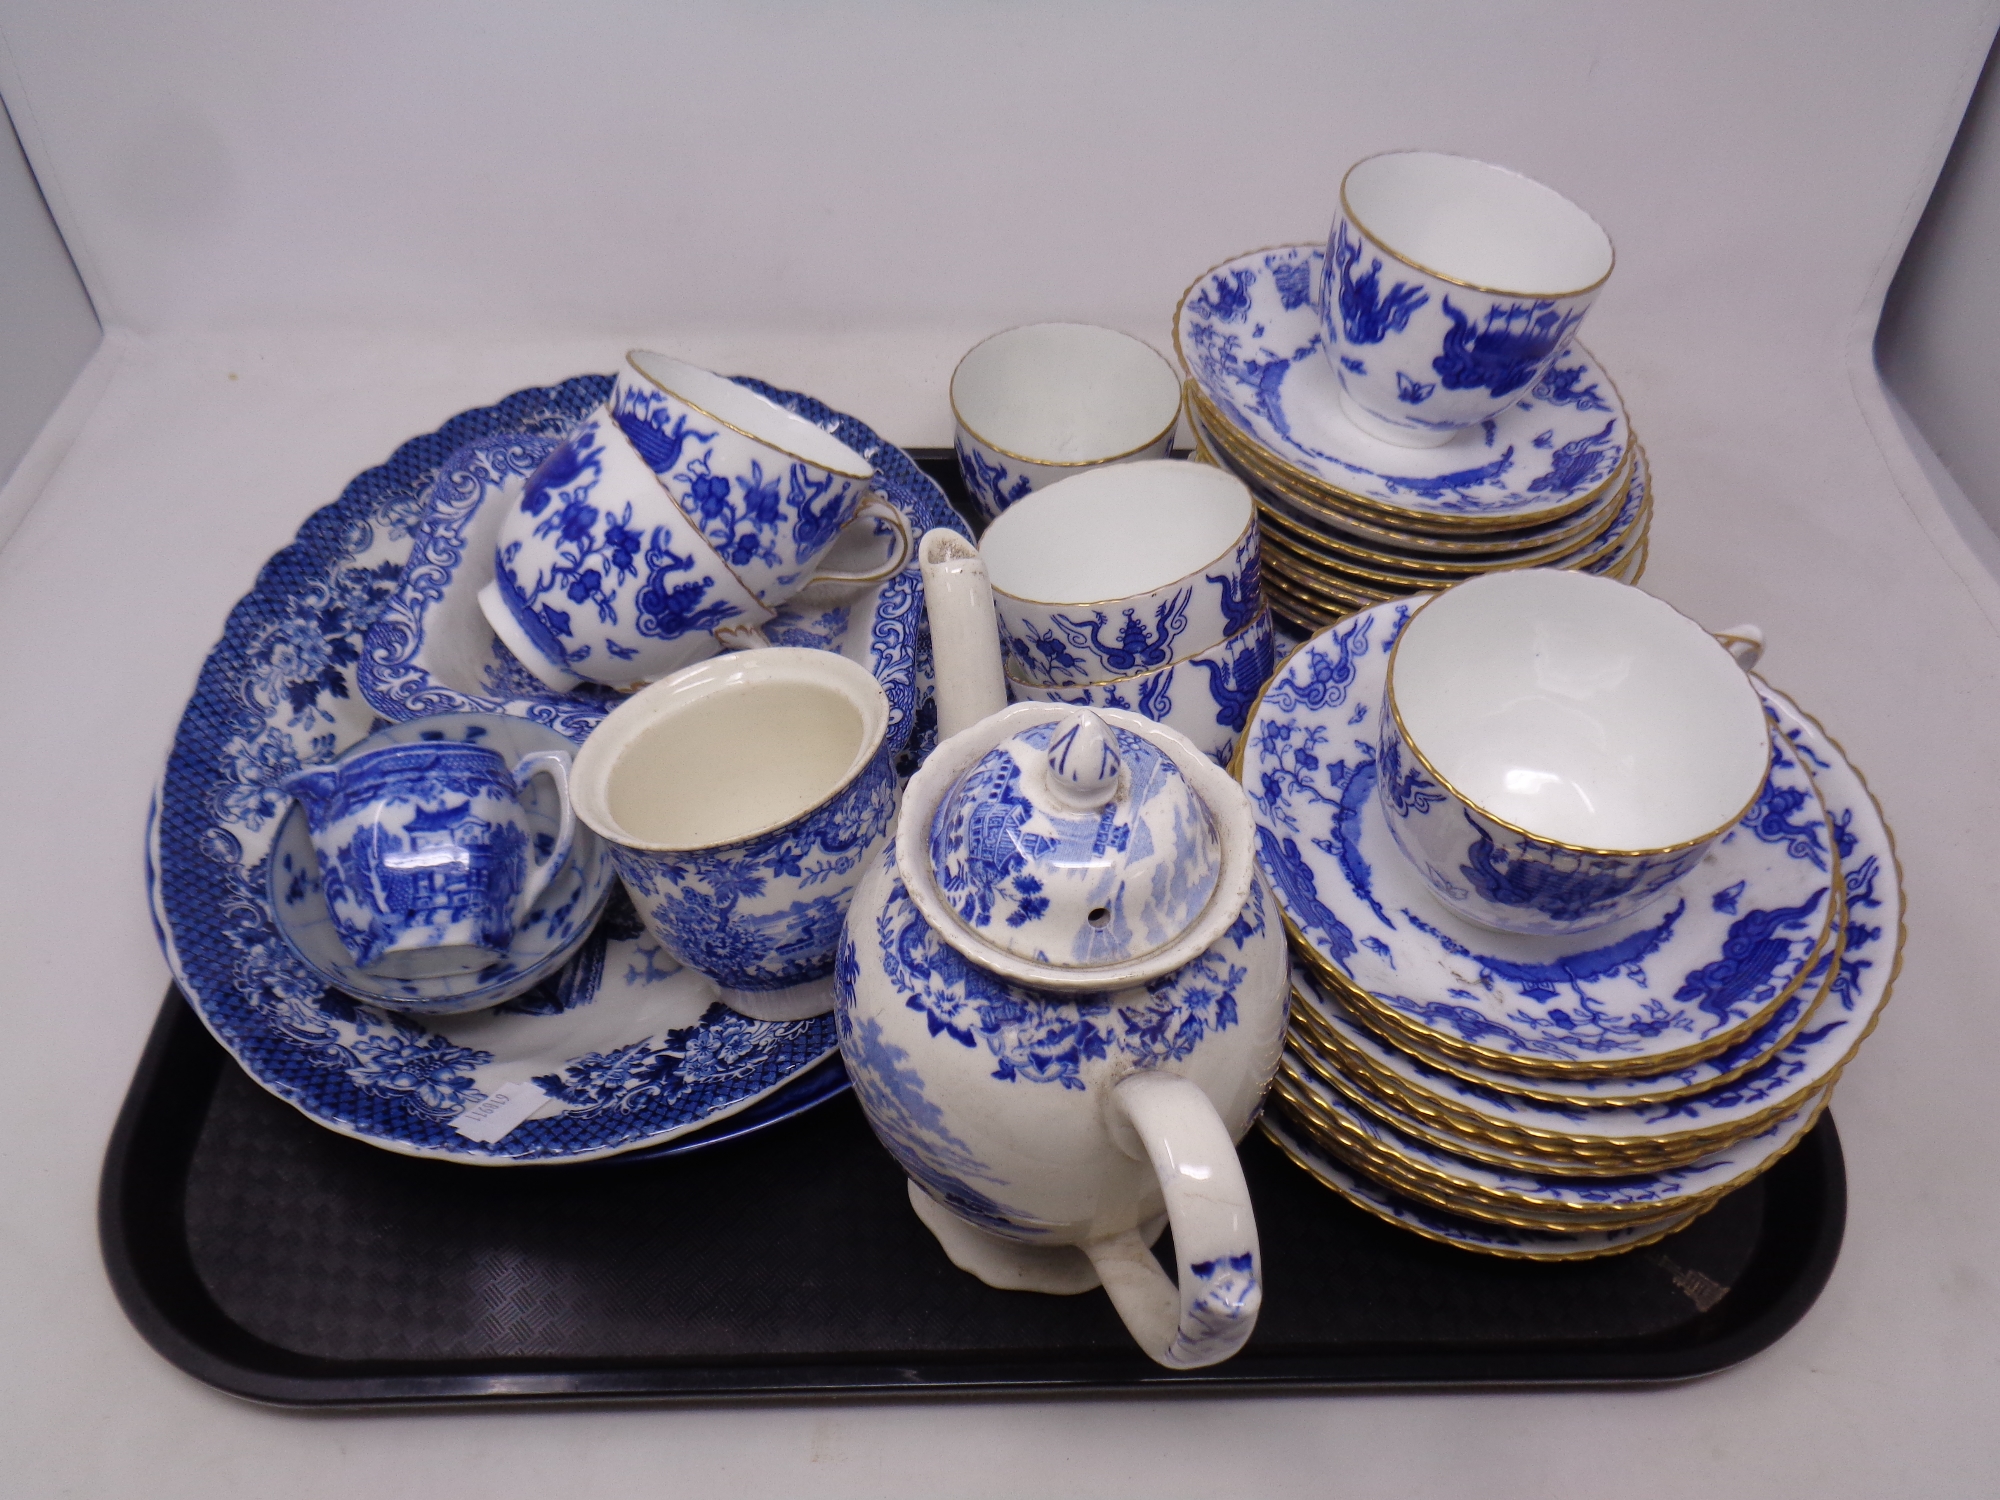 A tray of antique and later blue & white ceramics